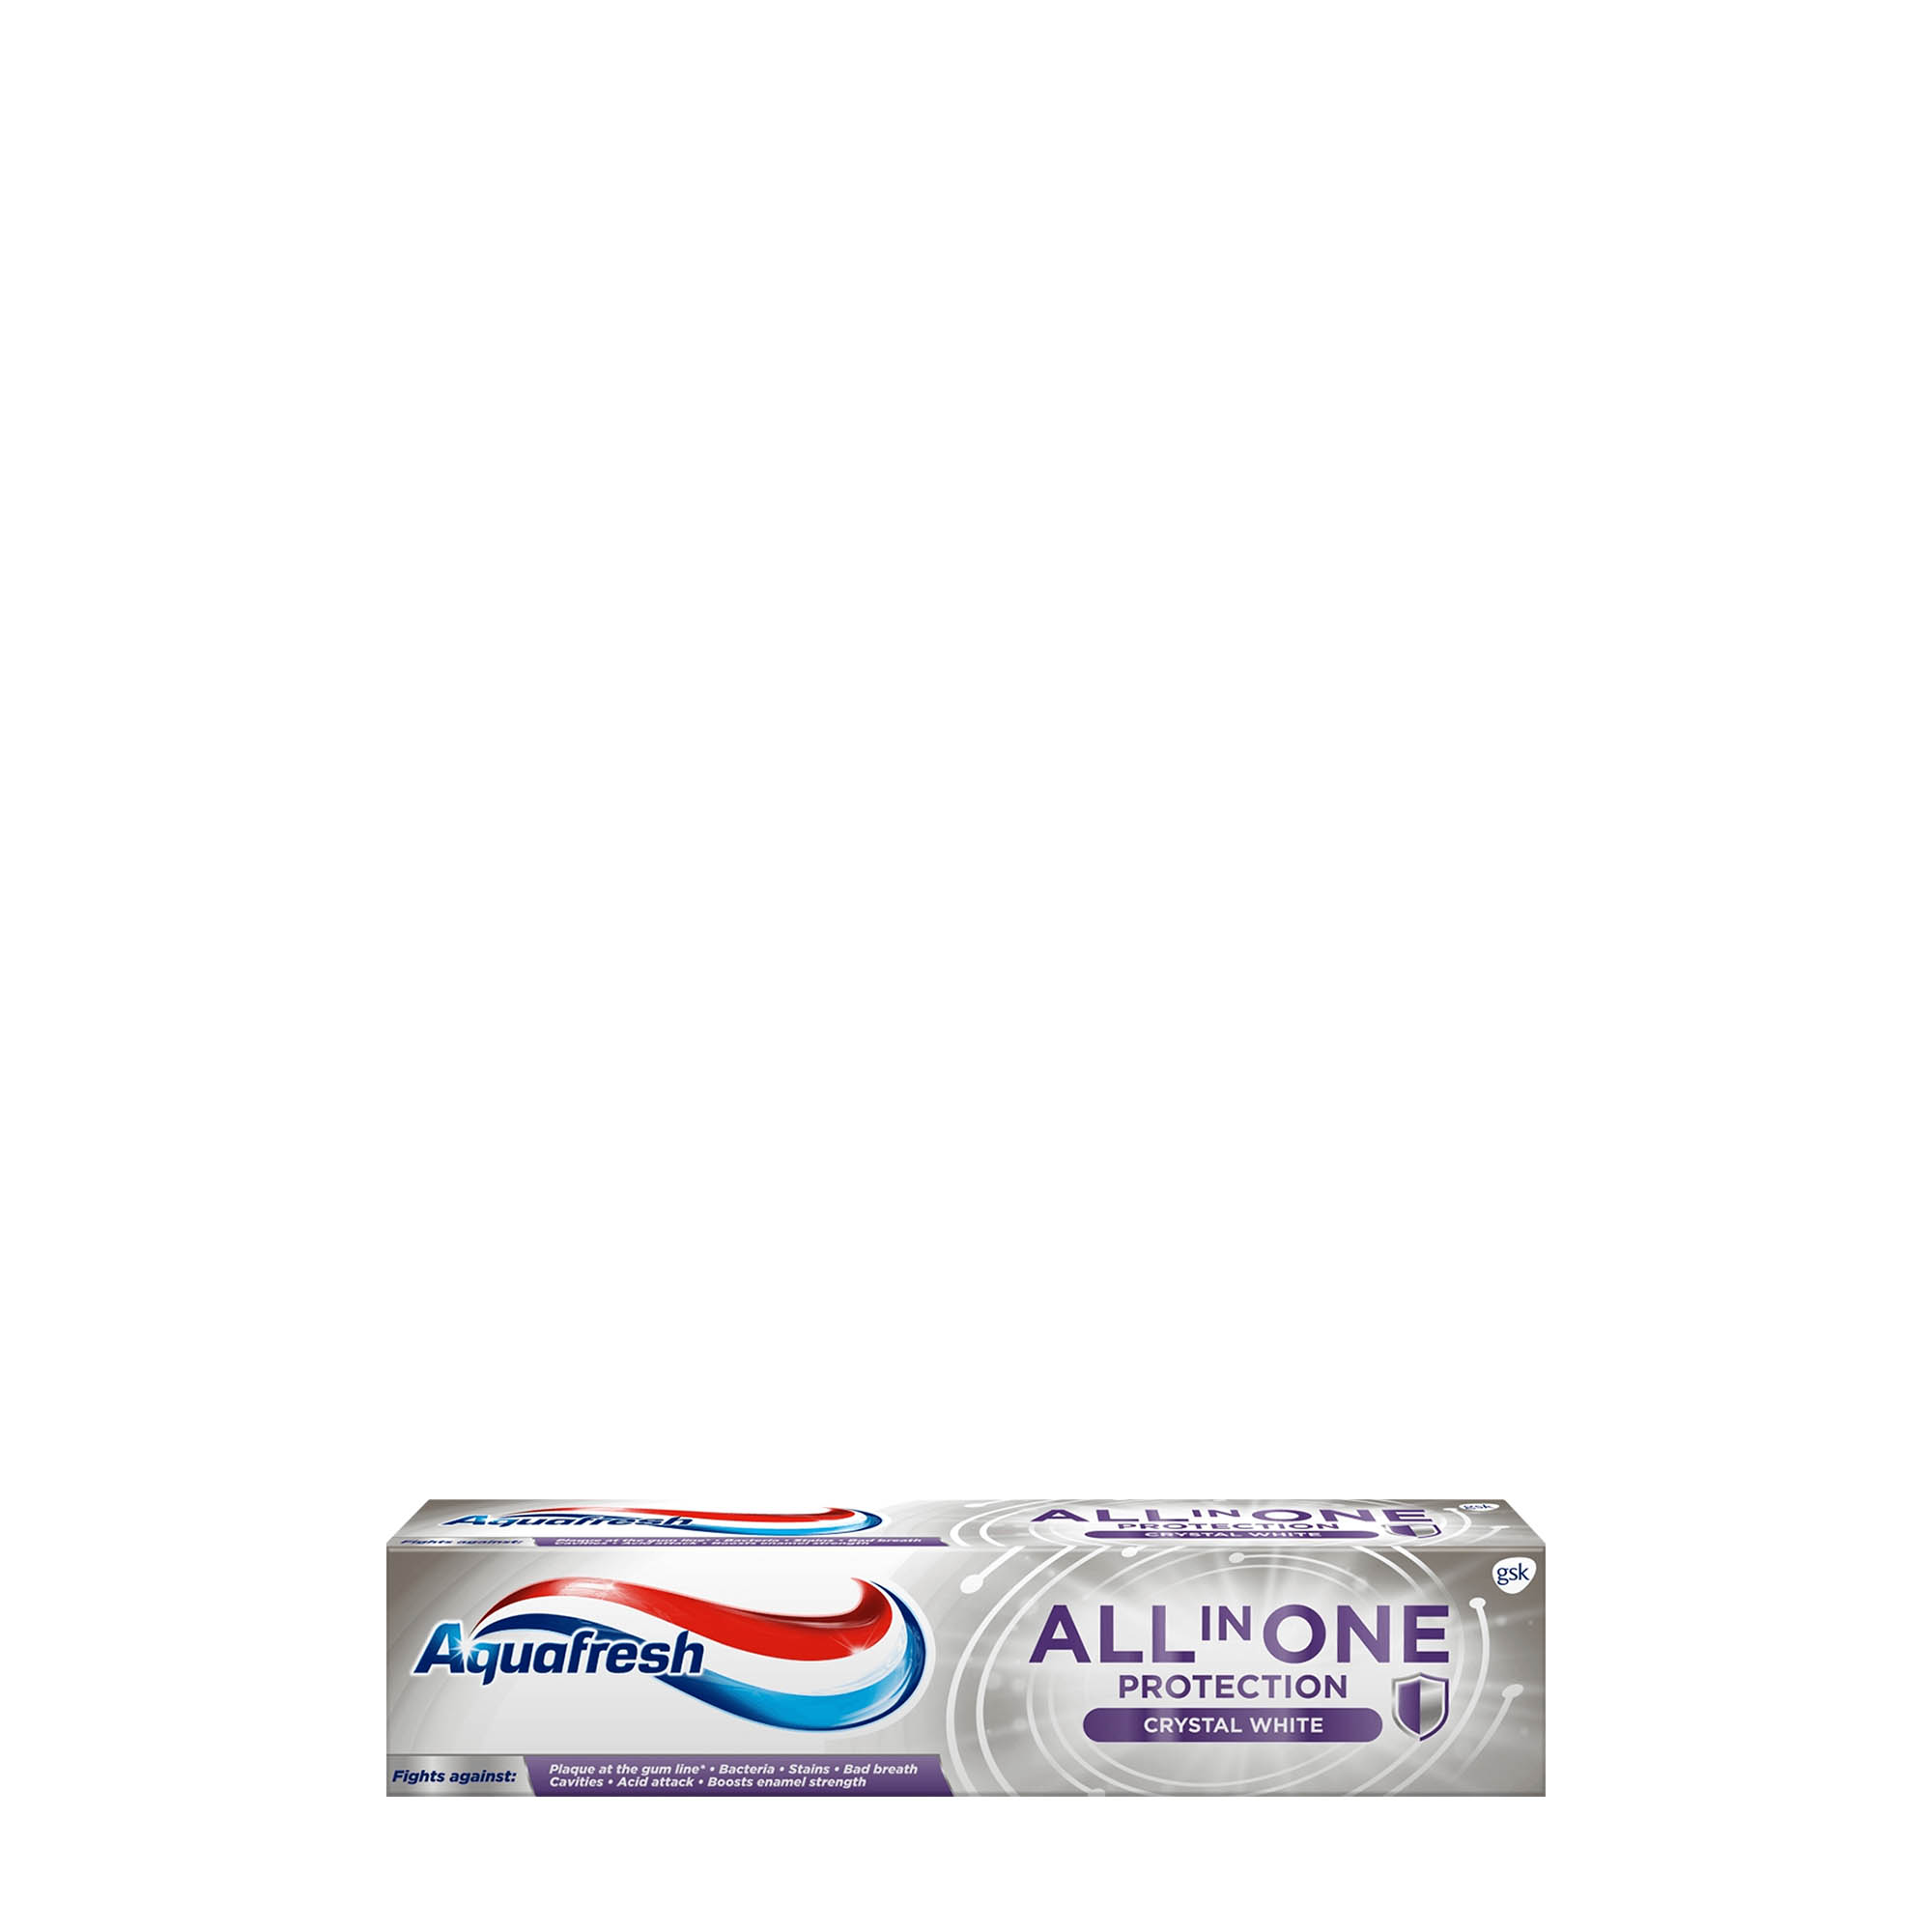 aquafresh toothpaste all on one protection crystal white 100ml